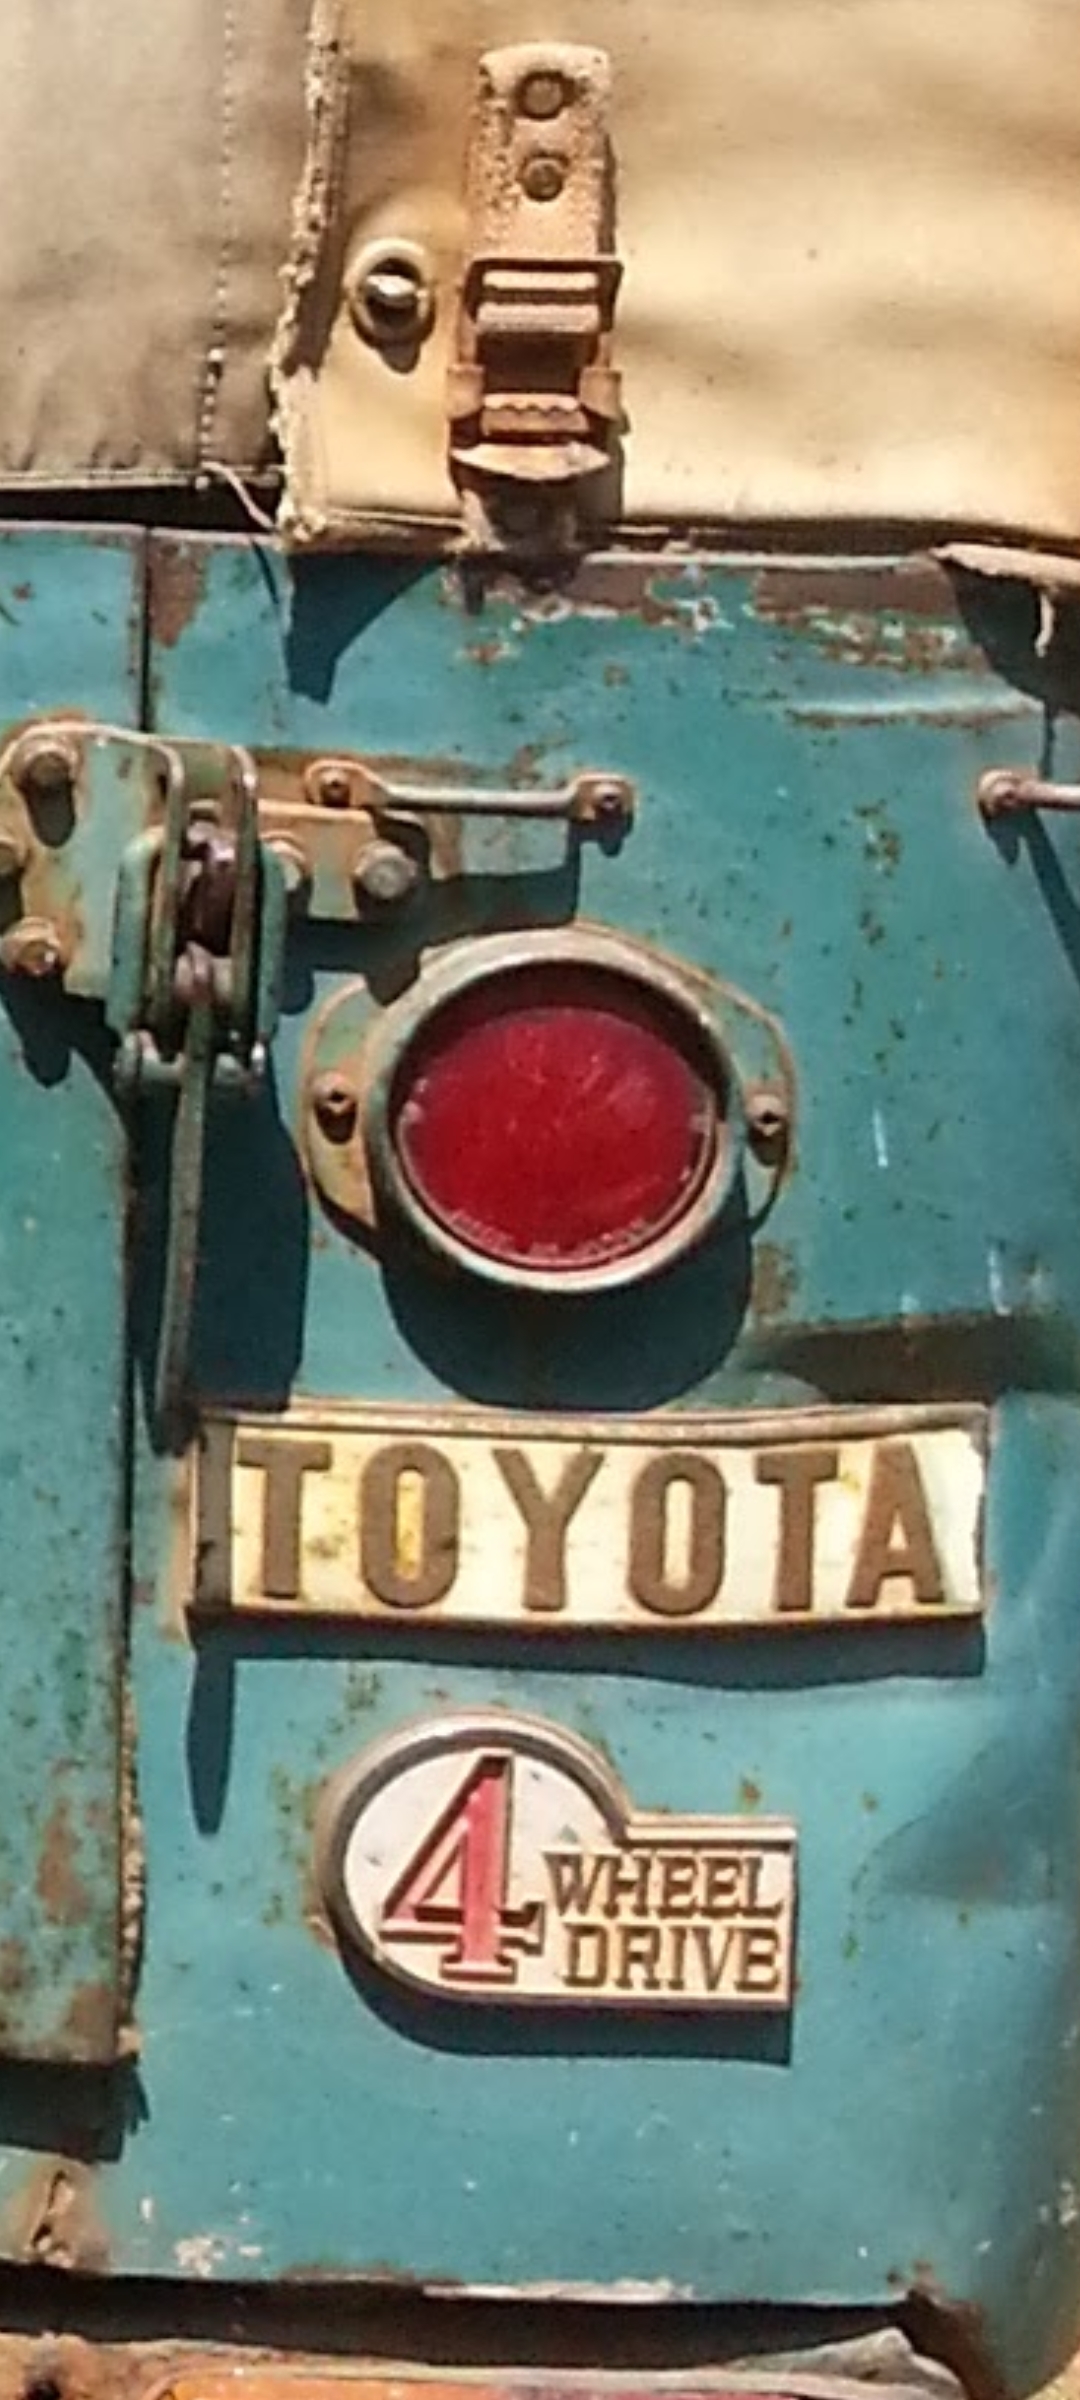 Early type 4wd and Toyota Badge